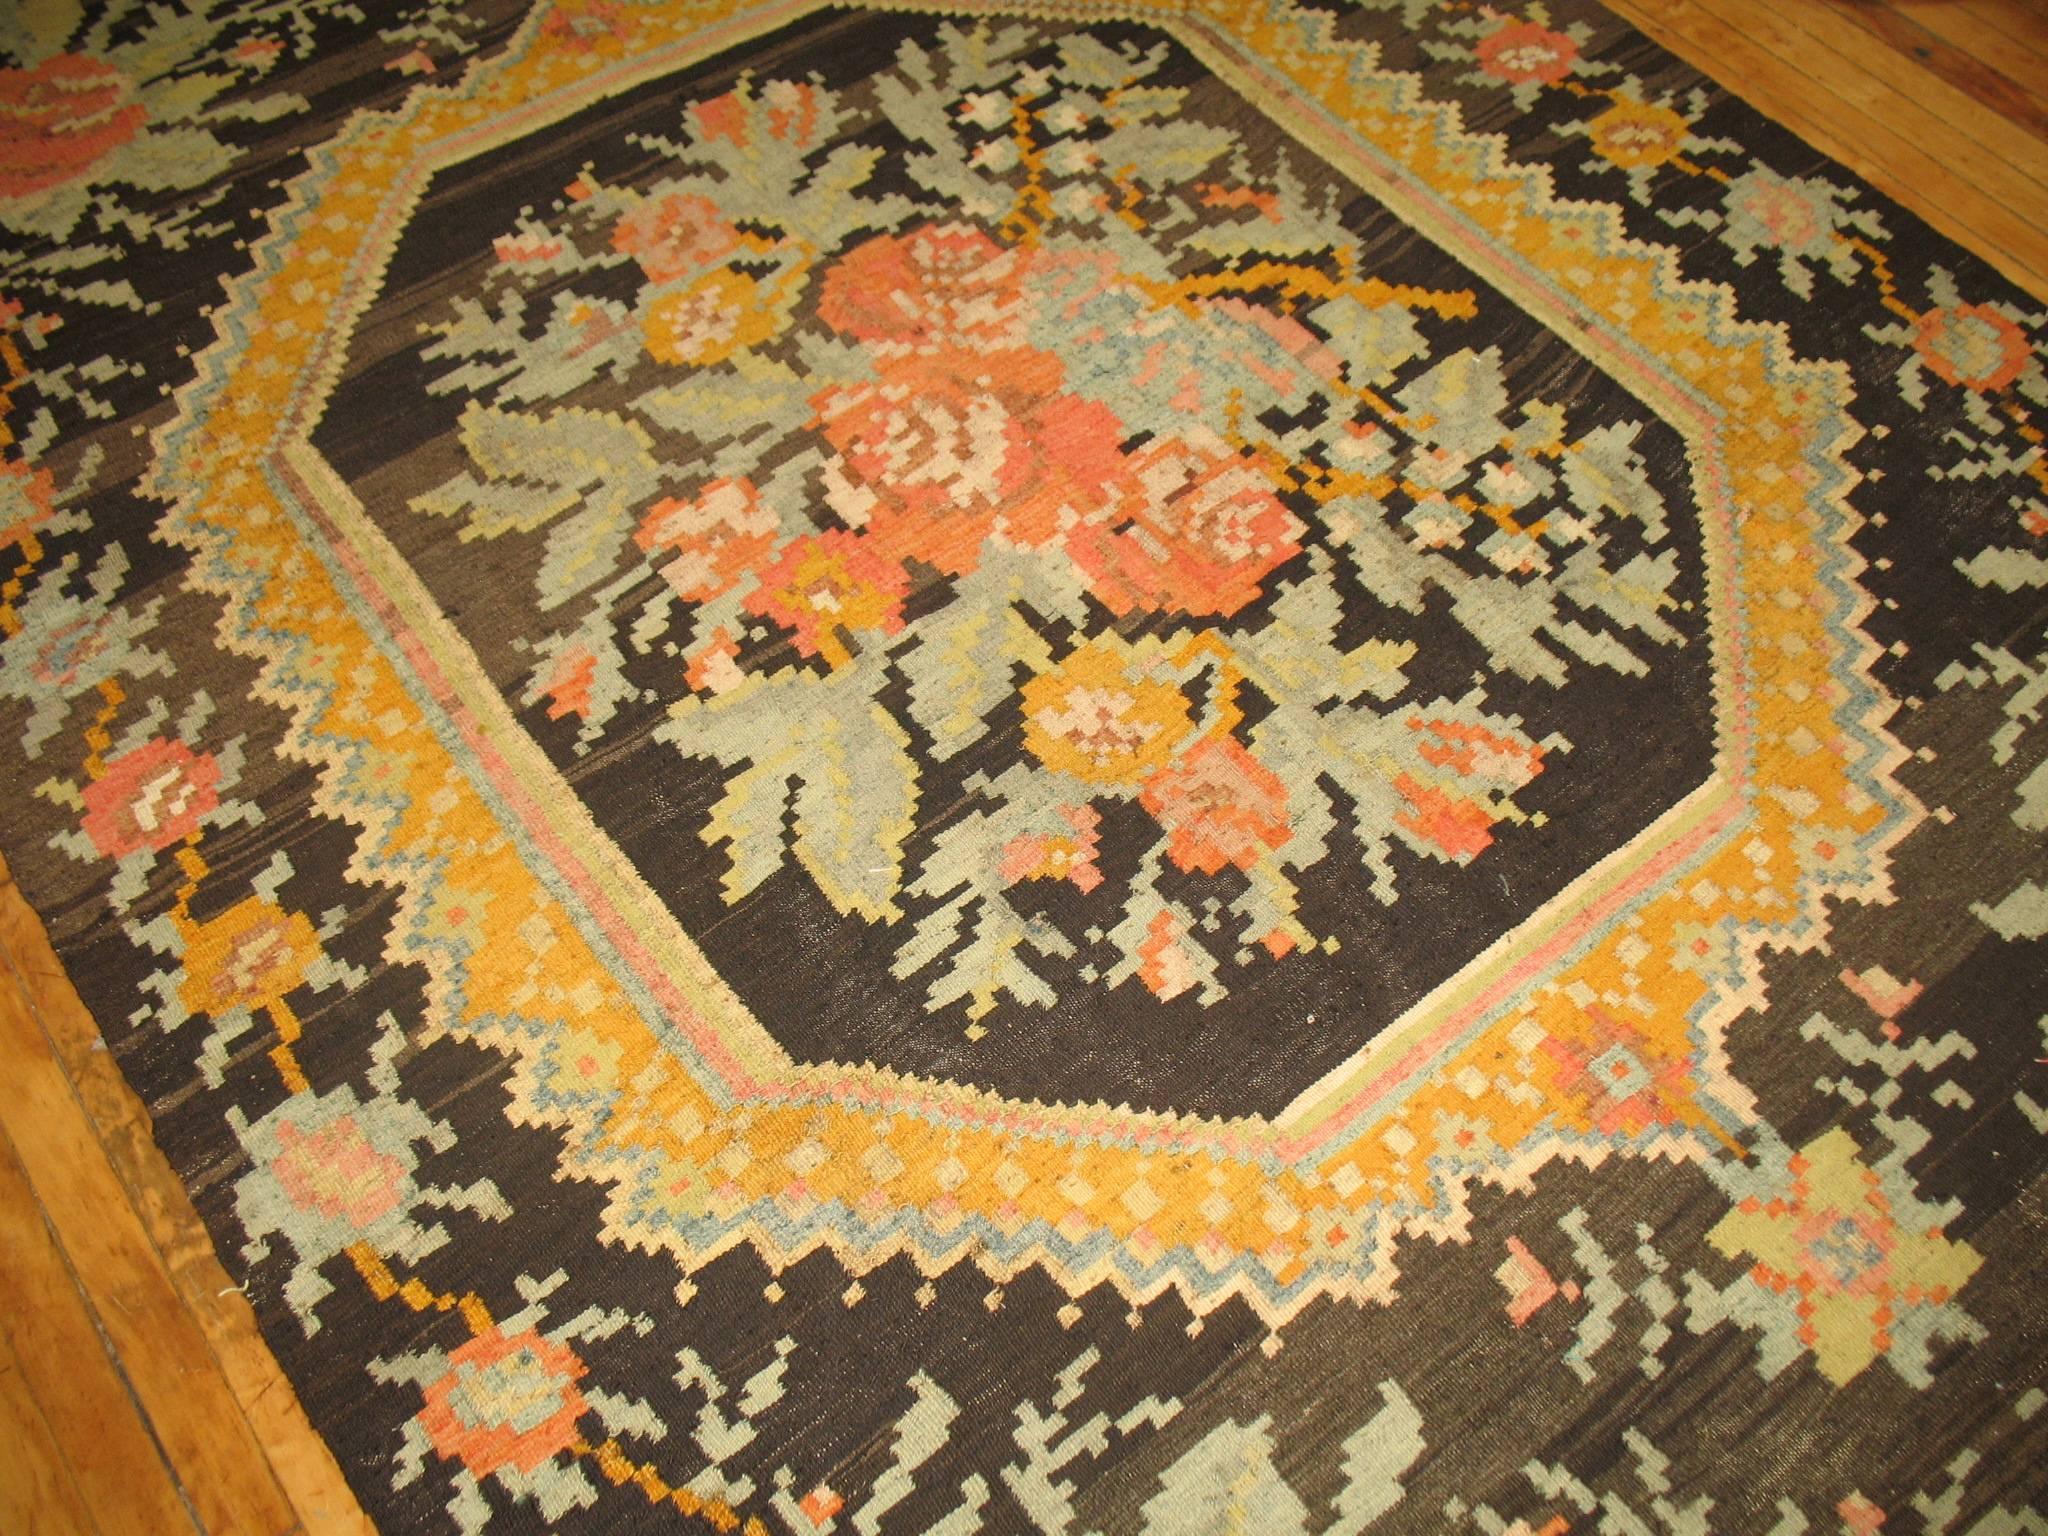 Vintage Besserabian Kilim with a large scale floral motif in bright yellow, light green and orange accents on a brown field

6' x 8'9''